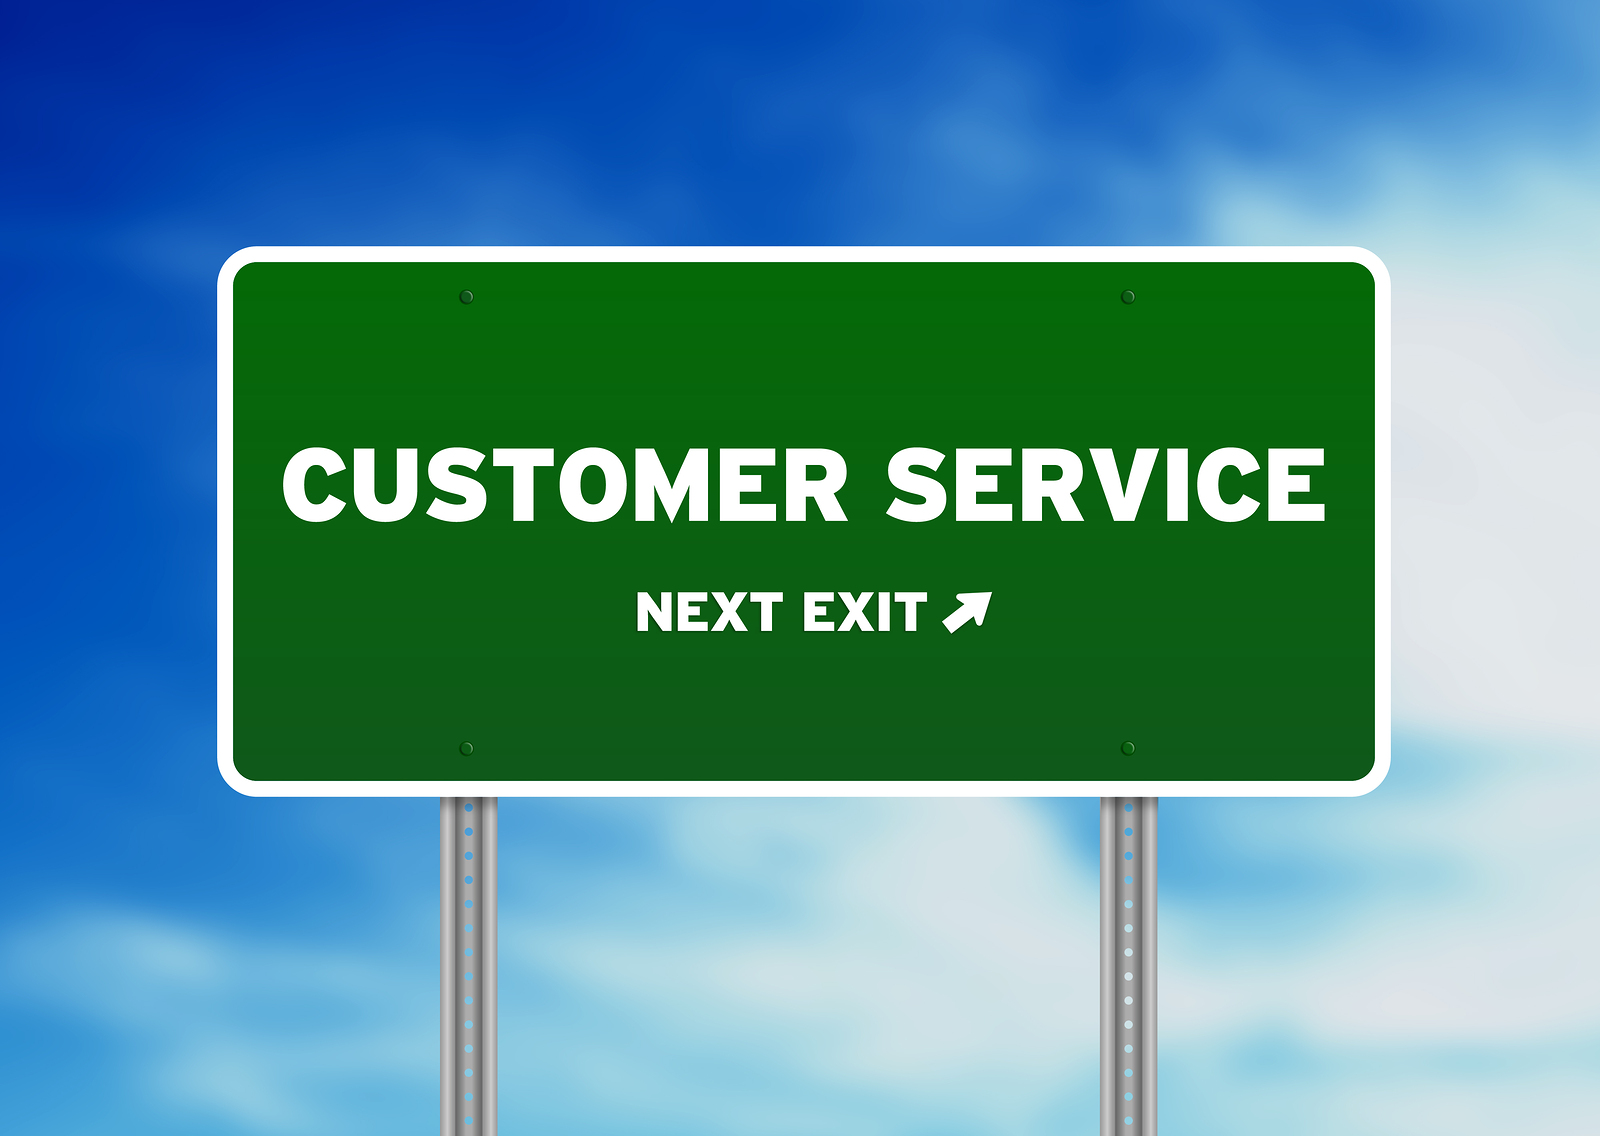 Great Customer Service is not Punitive